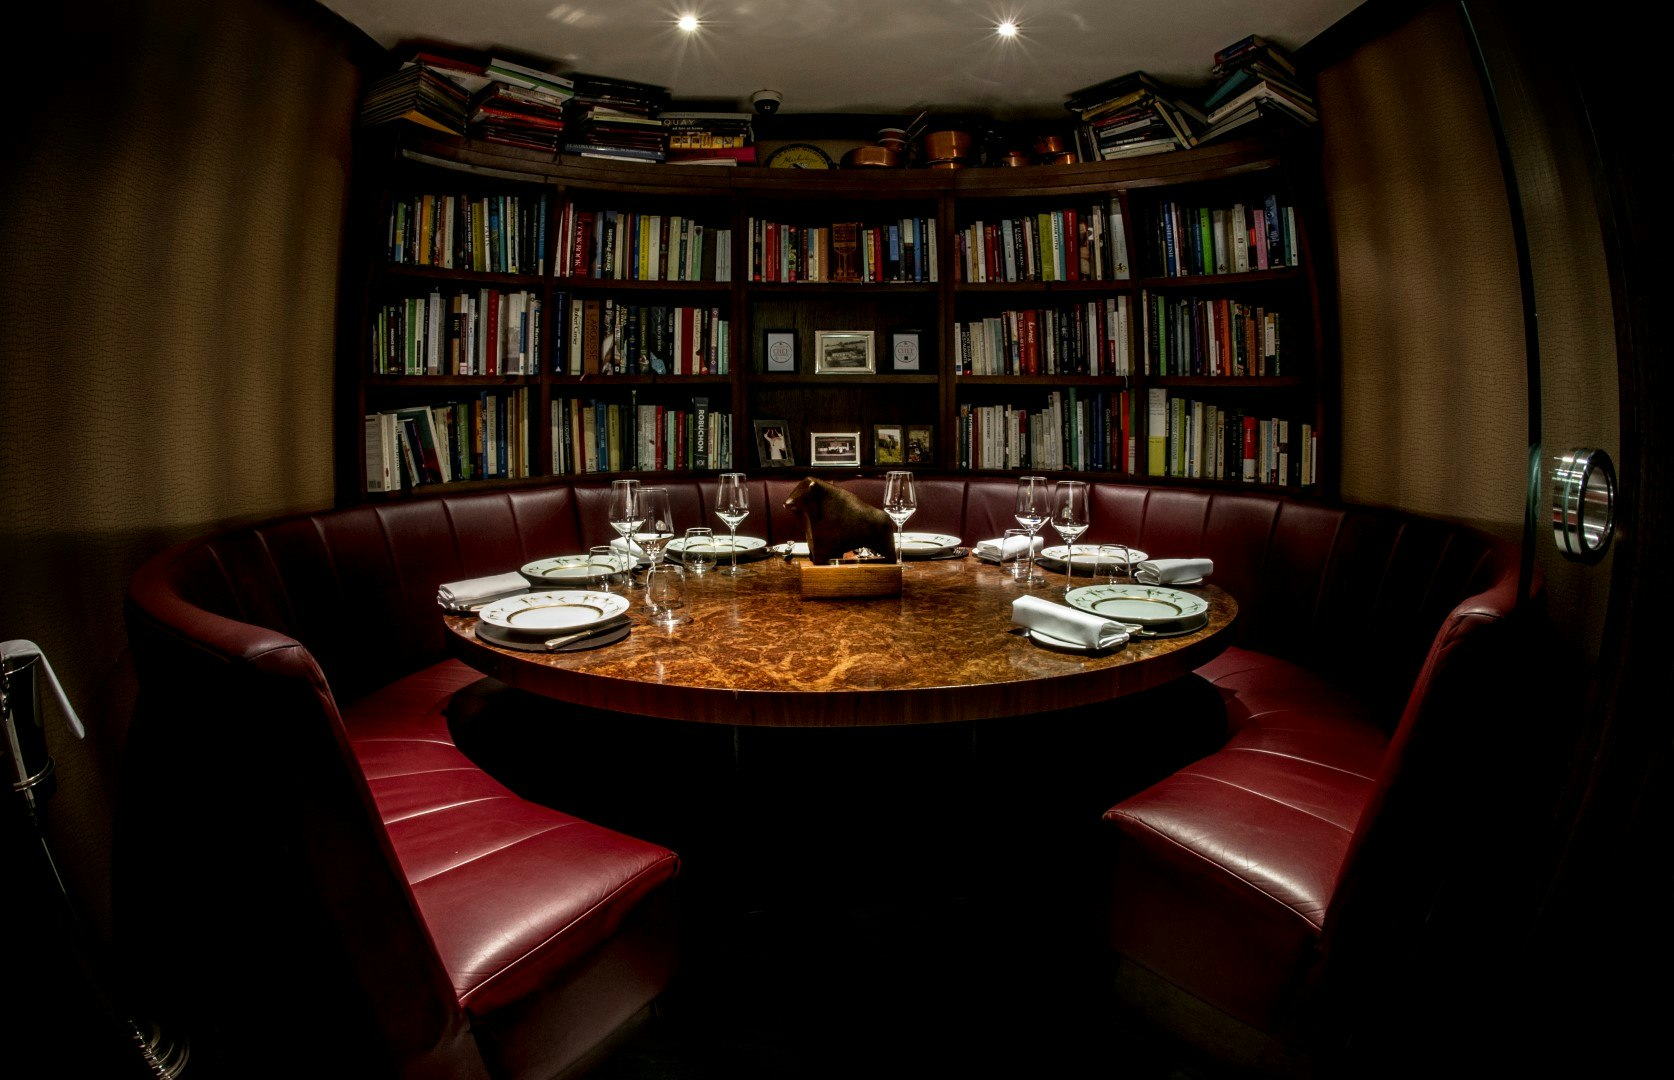 Restaurants With Private Rooms Venues in London - Corrigan's Mayfair